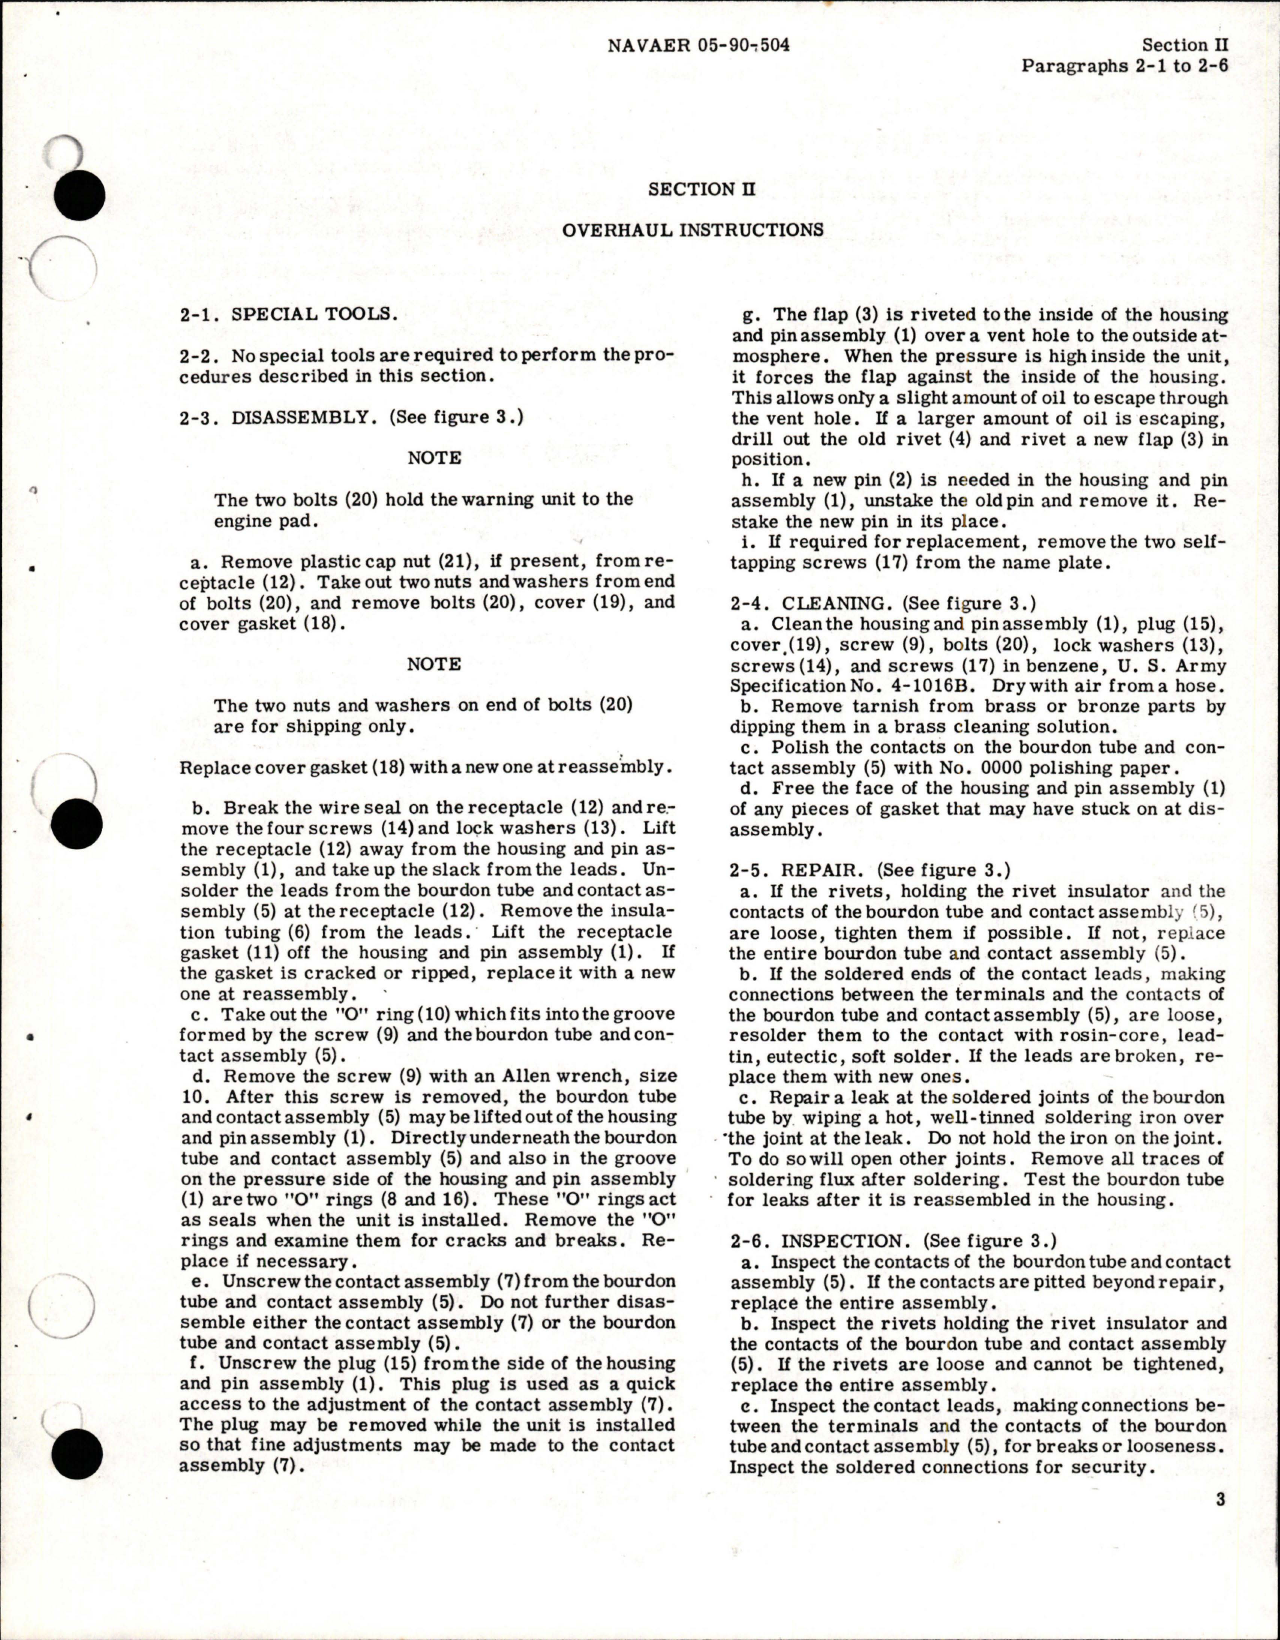 Sample page 5 from AirCorps Library document: Operation, Service and Overhaul with Parts for Oil Pressure Warning Unit - Parts 3140-1-A-500 and 3140-1-A-550